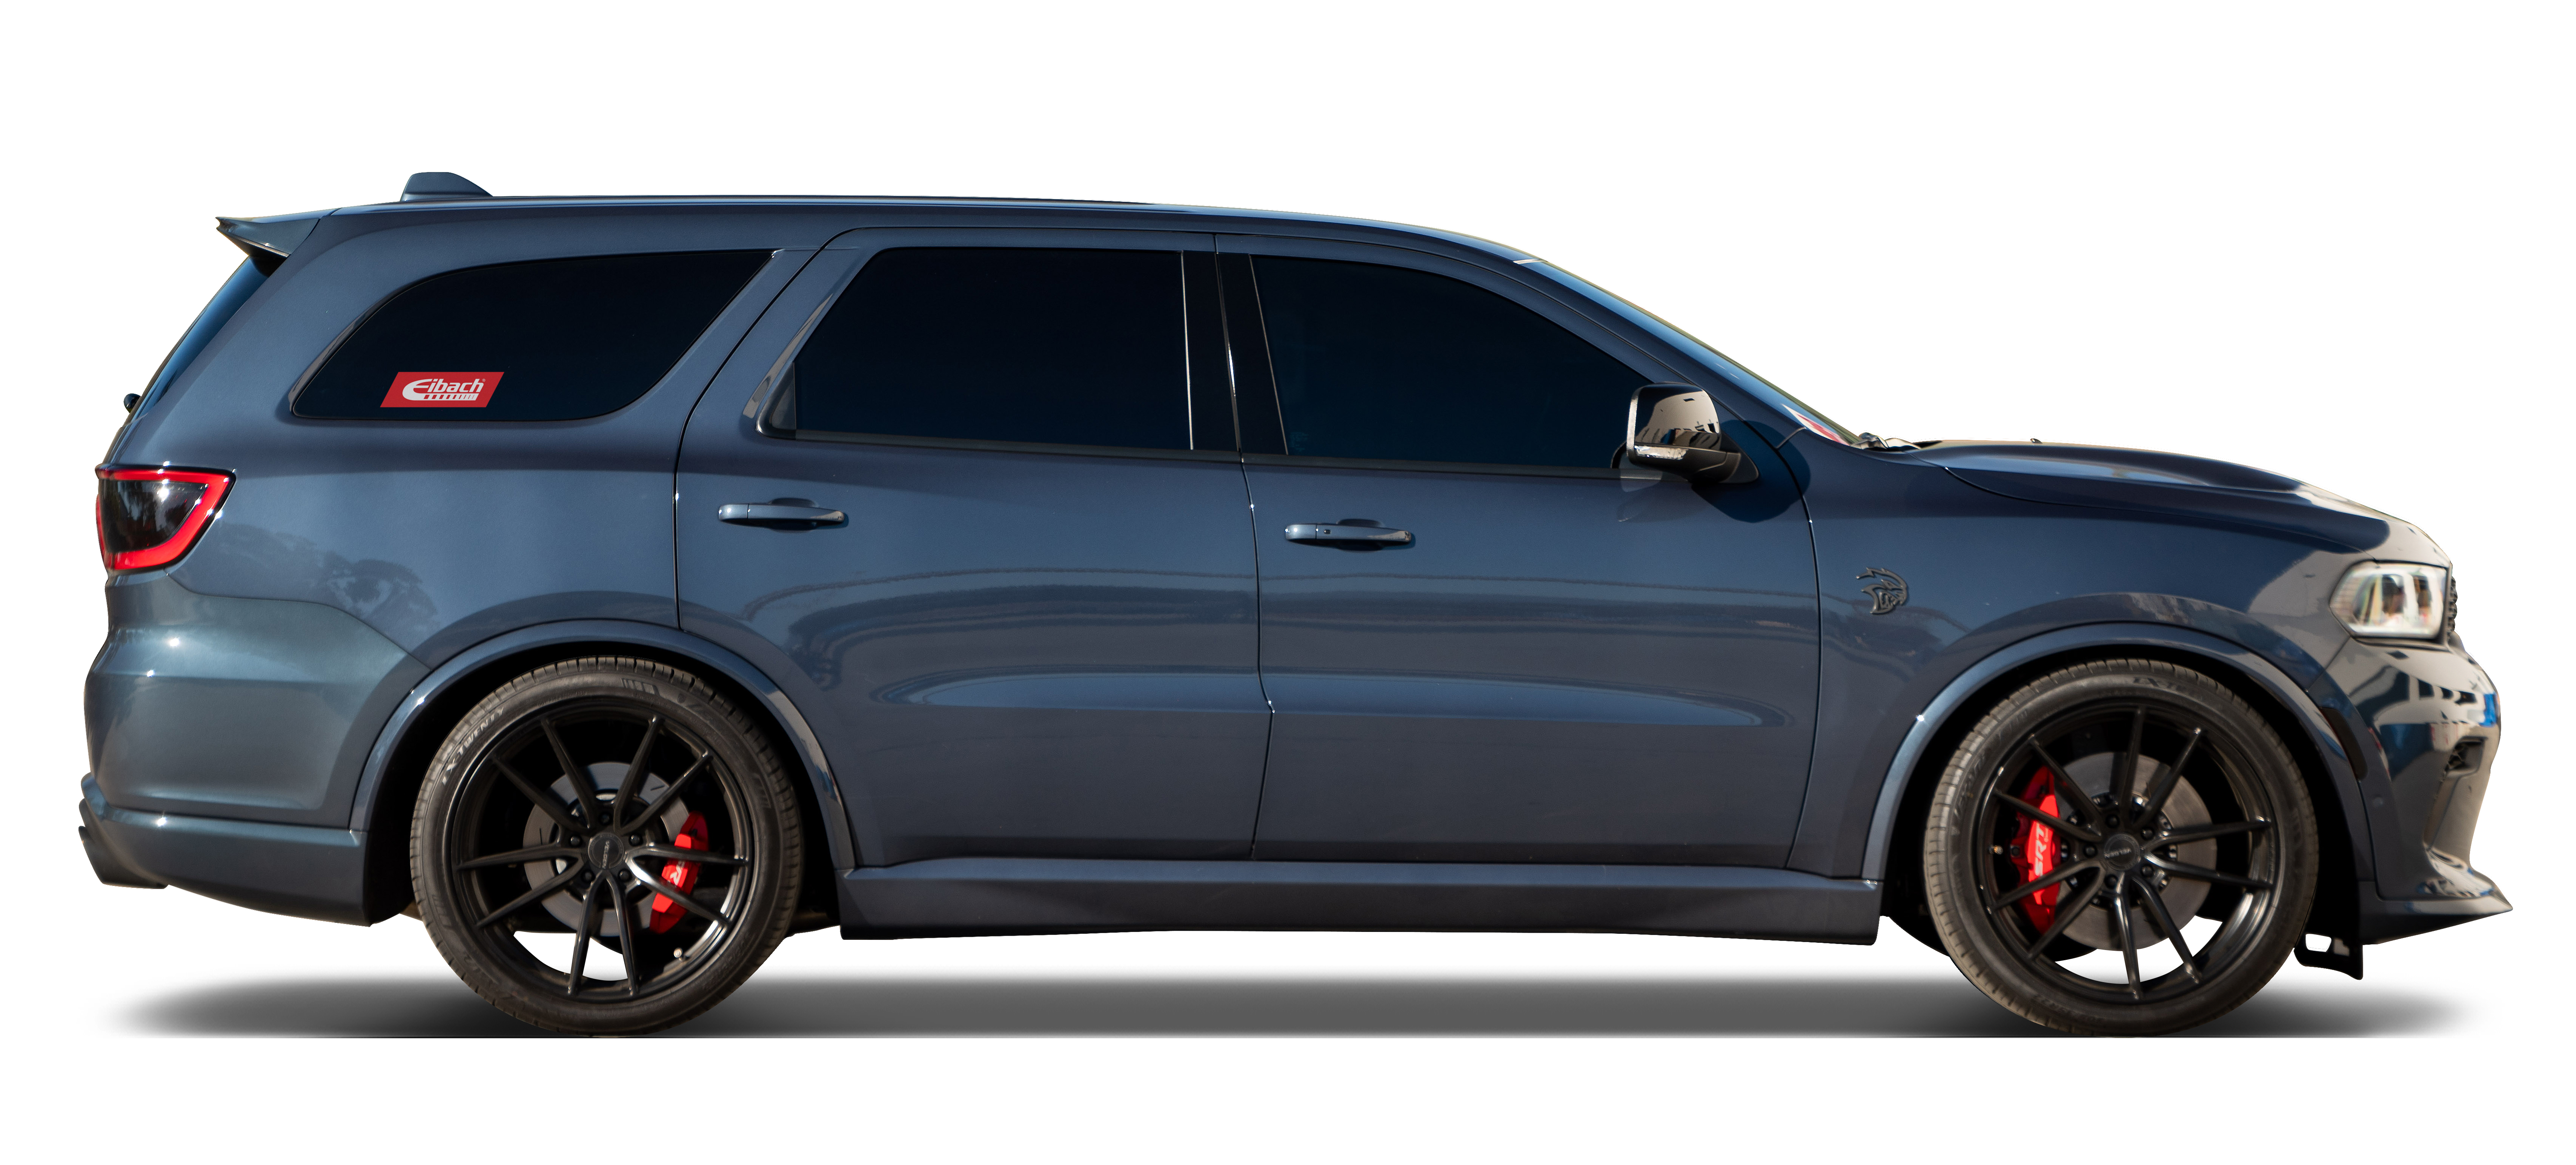 2021-2023 Dodge Durango SRT Hellcat sideview after lowering